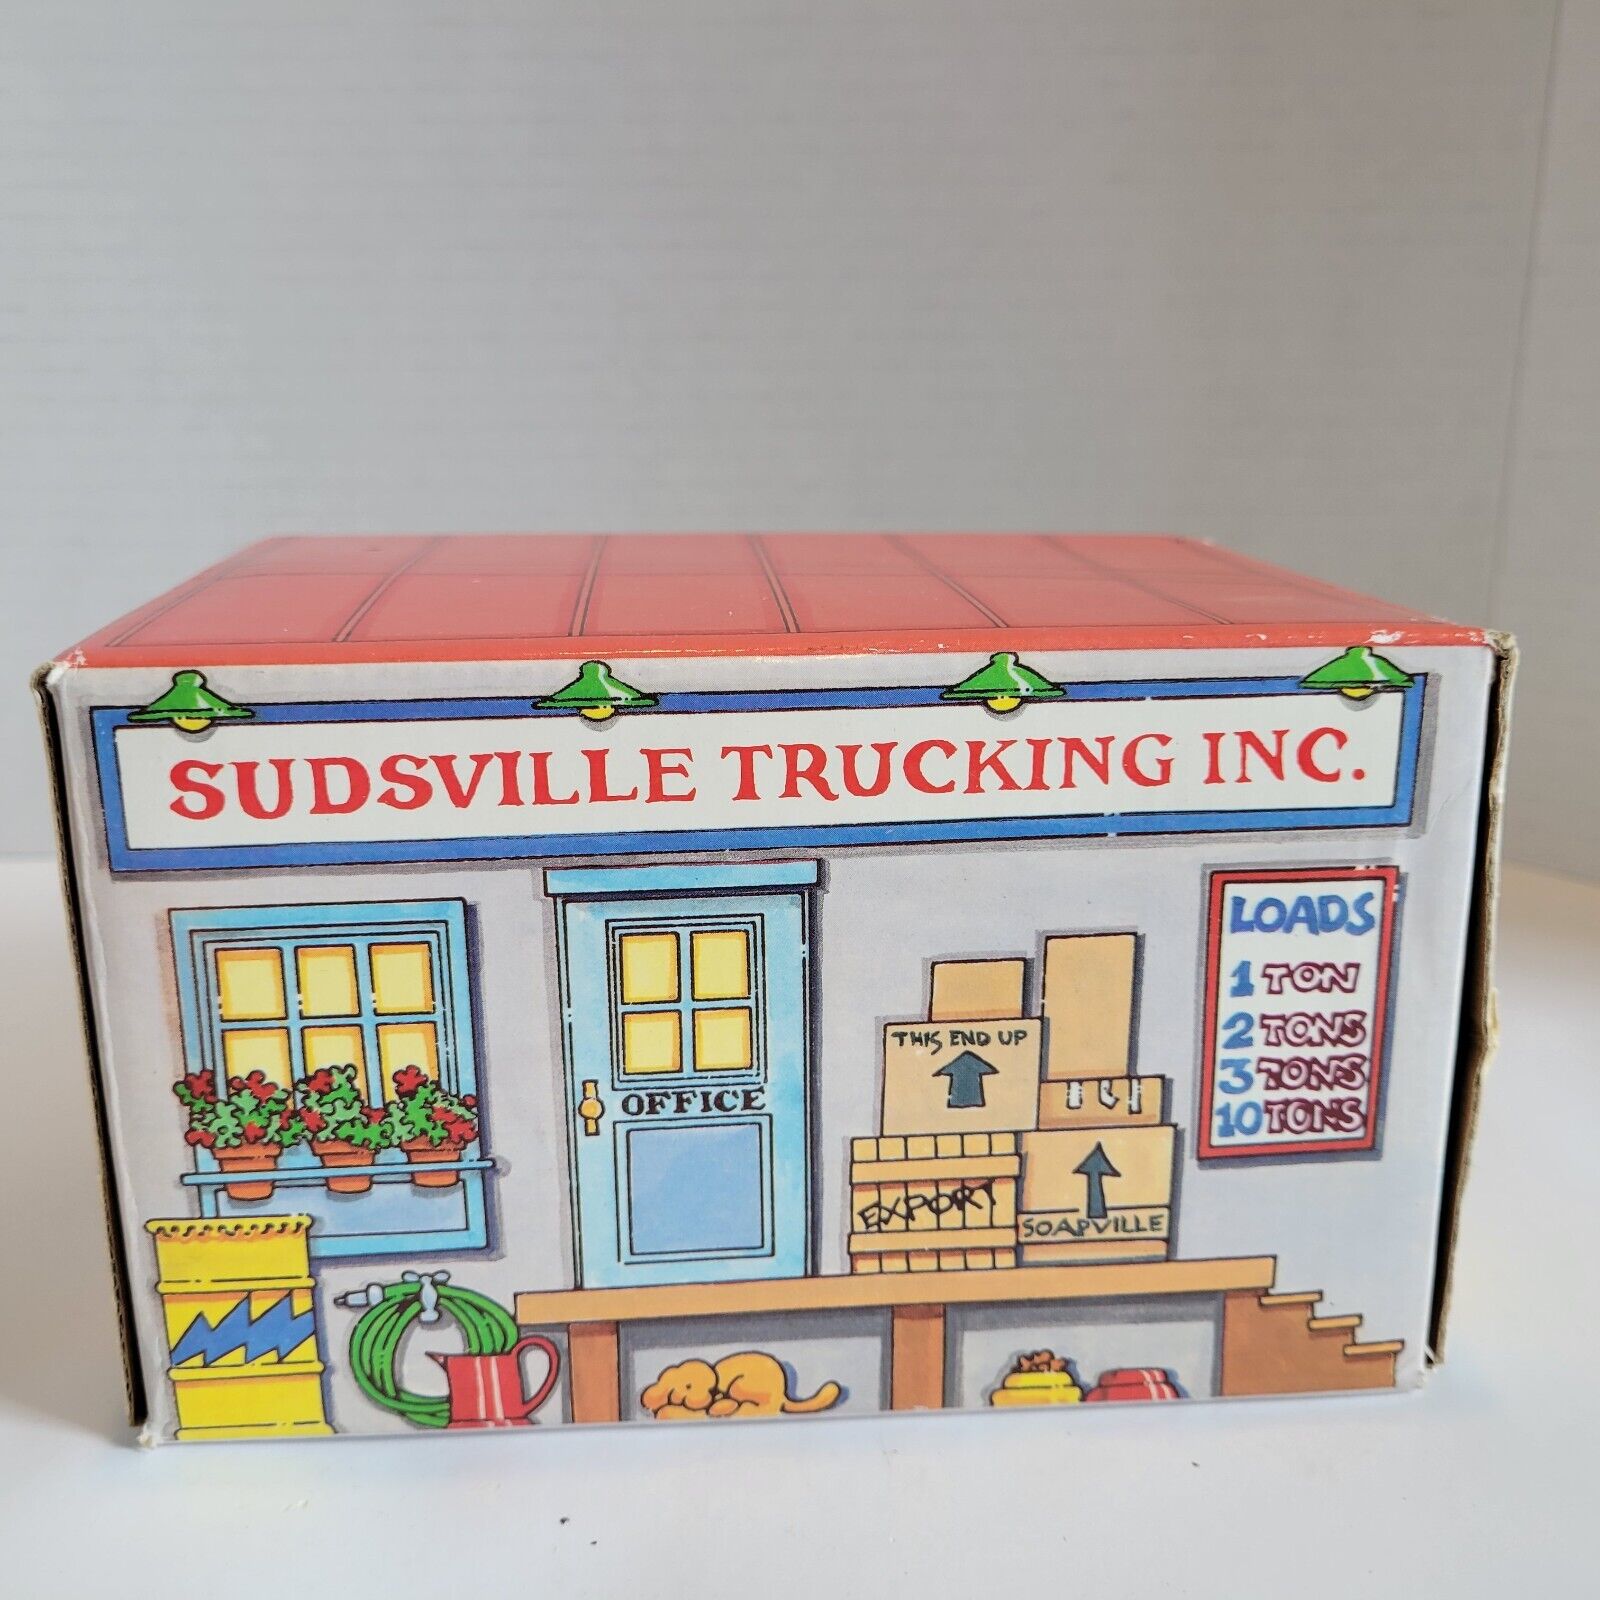 Vintage 1986 Avon Sudsville Trucking Inc Decorative Toy Truck With Soap Sealed